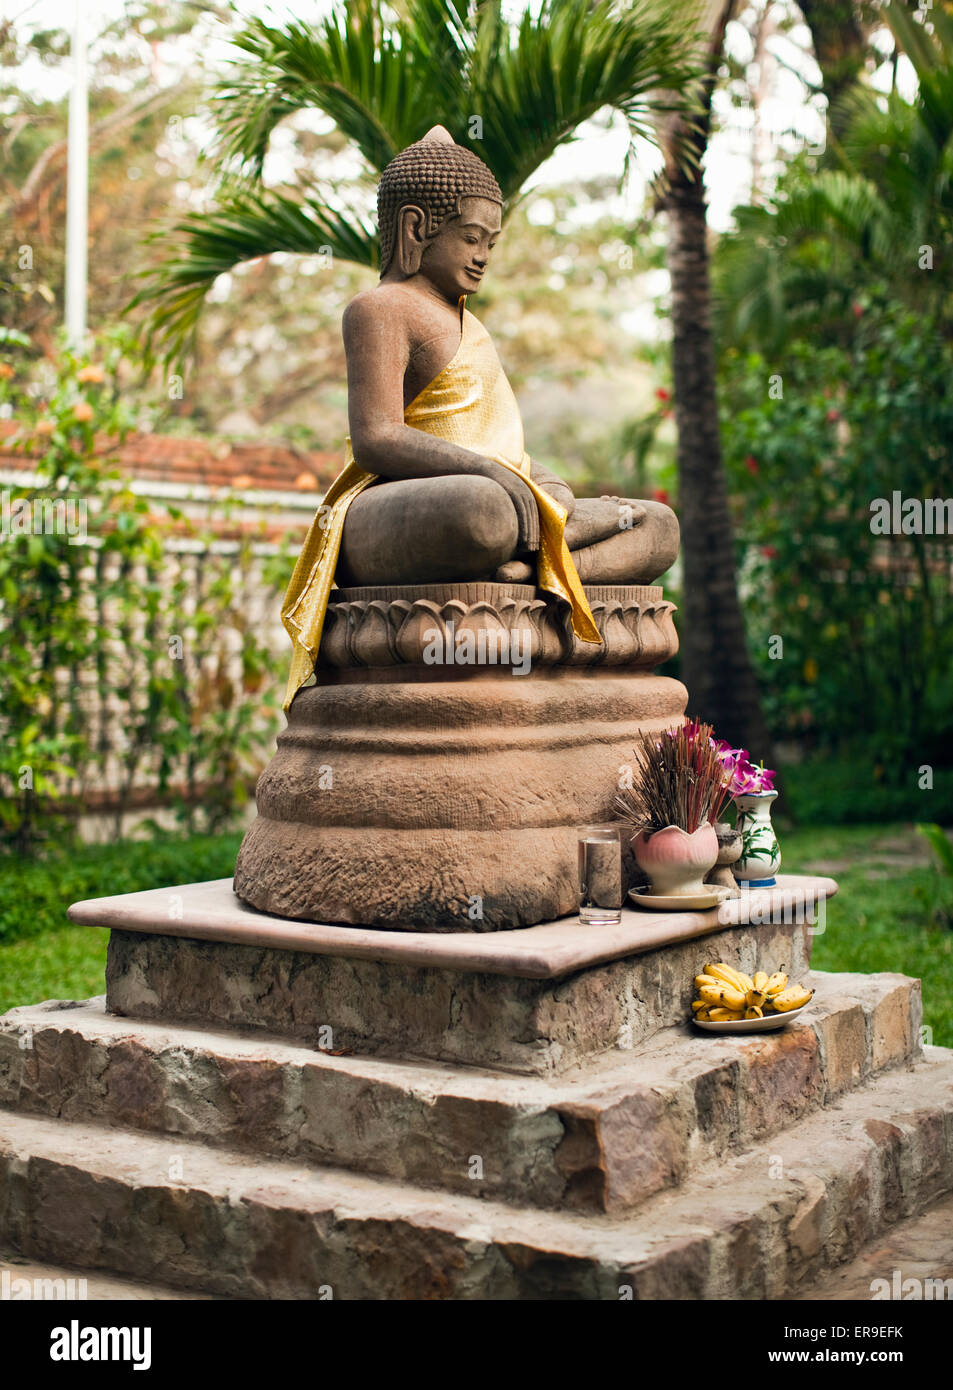 Buddha statues in the resort garden of La Residence d'Angkor, Siem Reap, Cambodia. Stock Photo